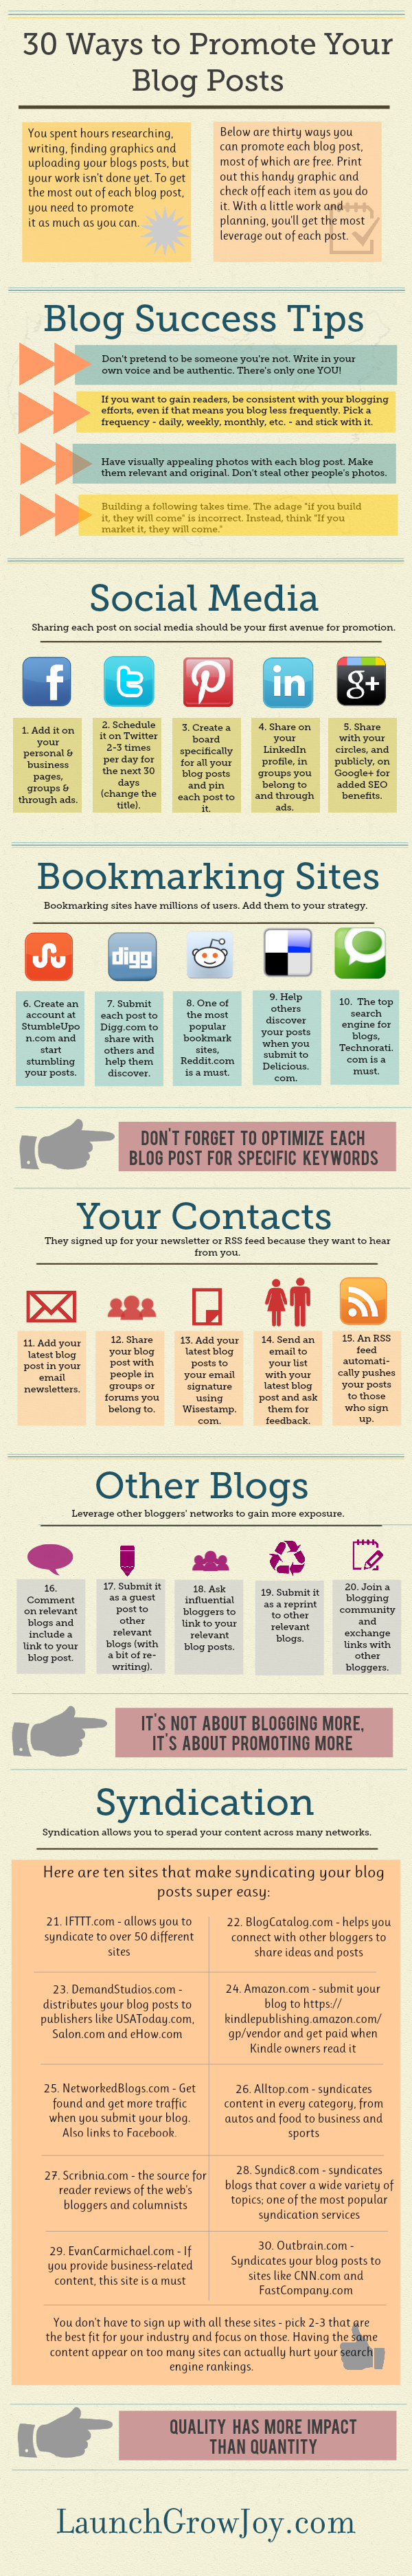 30 Ways To Promote Your Blog Posts - #infographic